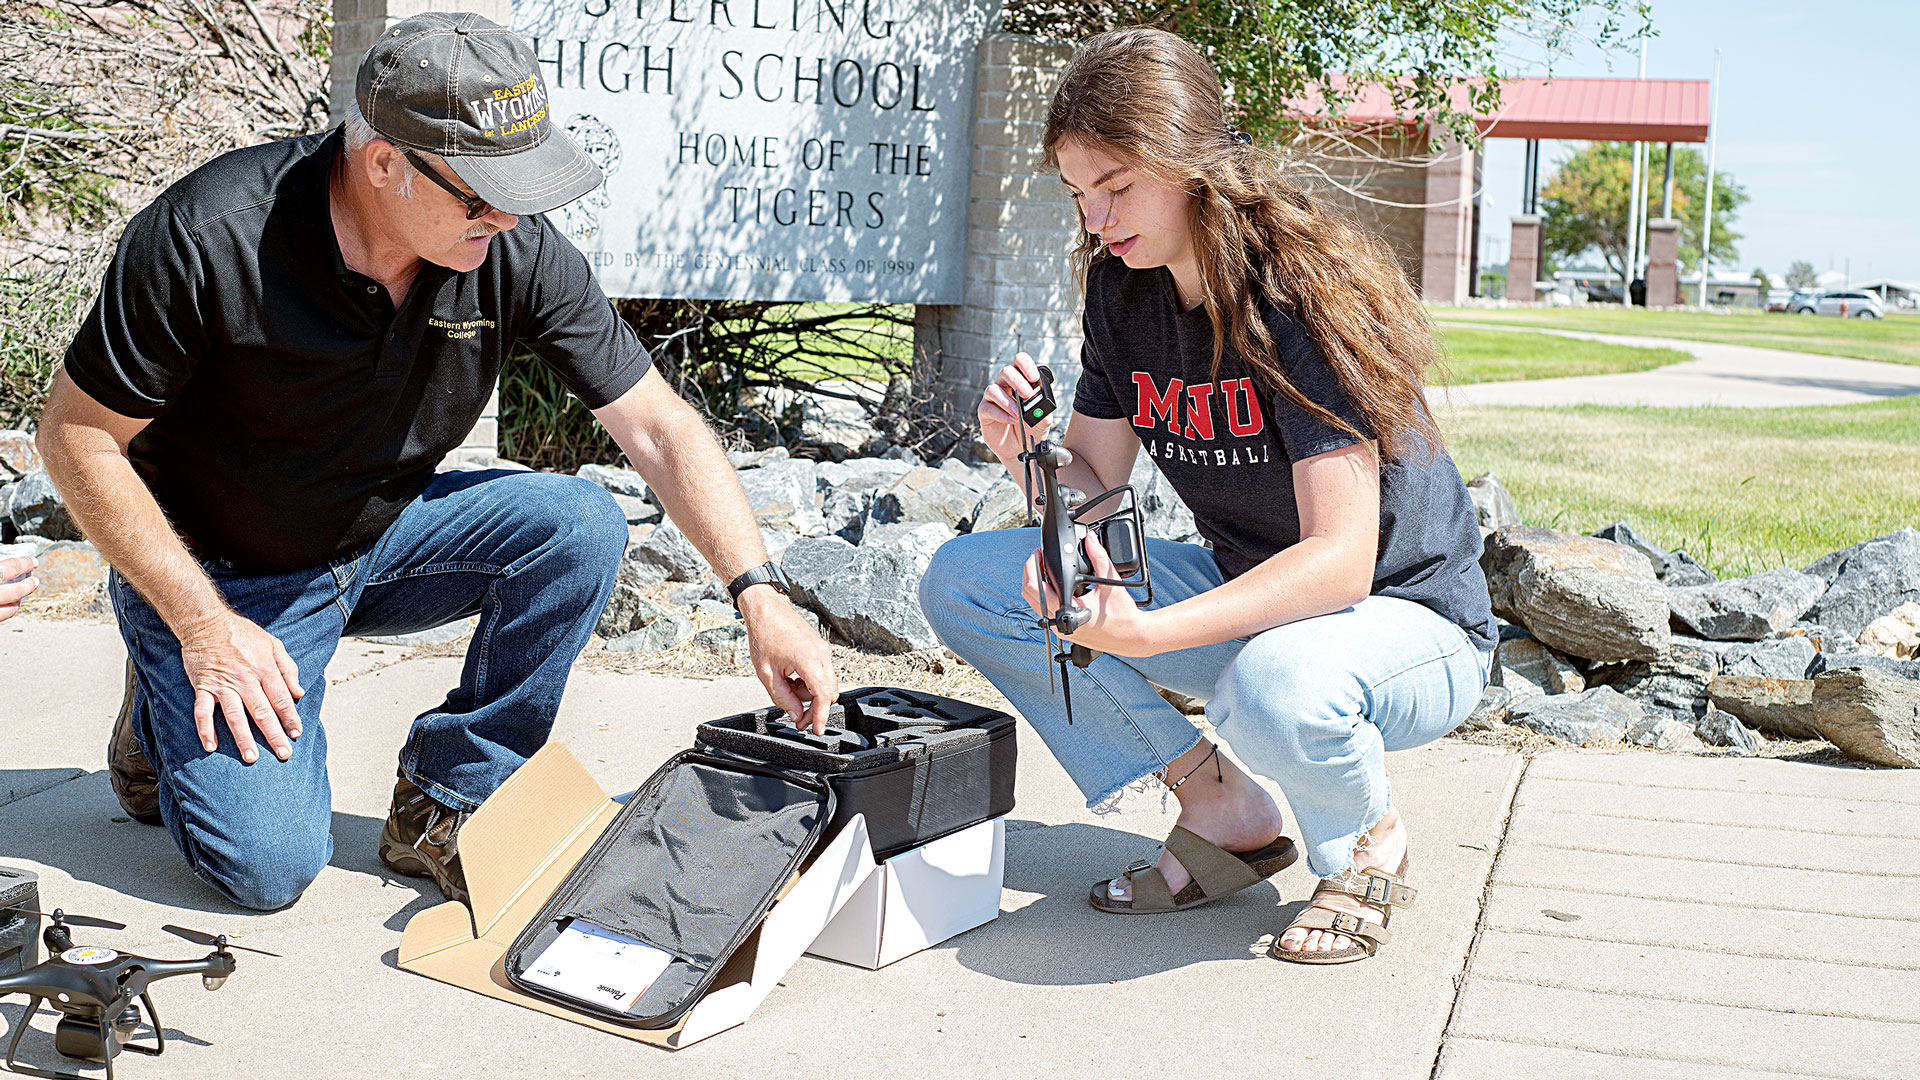 astern Wyoming College Precision Ag Instructor Matt Scott helps Sterling High School graduate Jalyssa Maker setup her new drone. Maker was one of the student winners in EWC's drone giveaway.